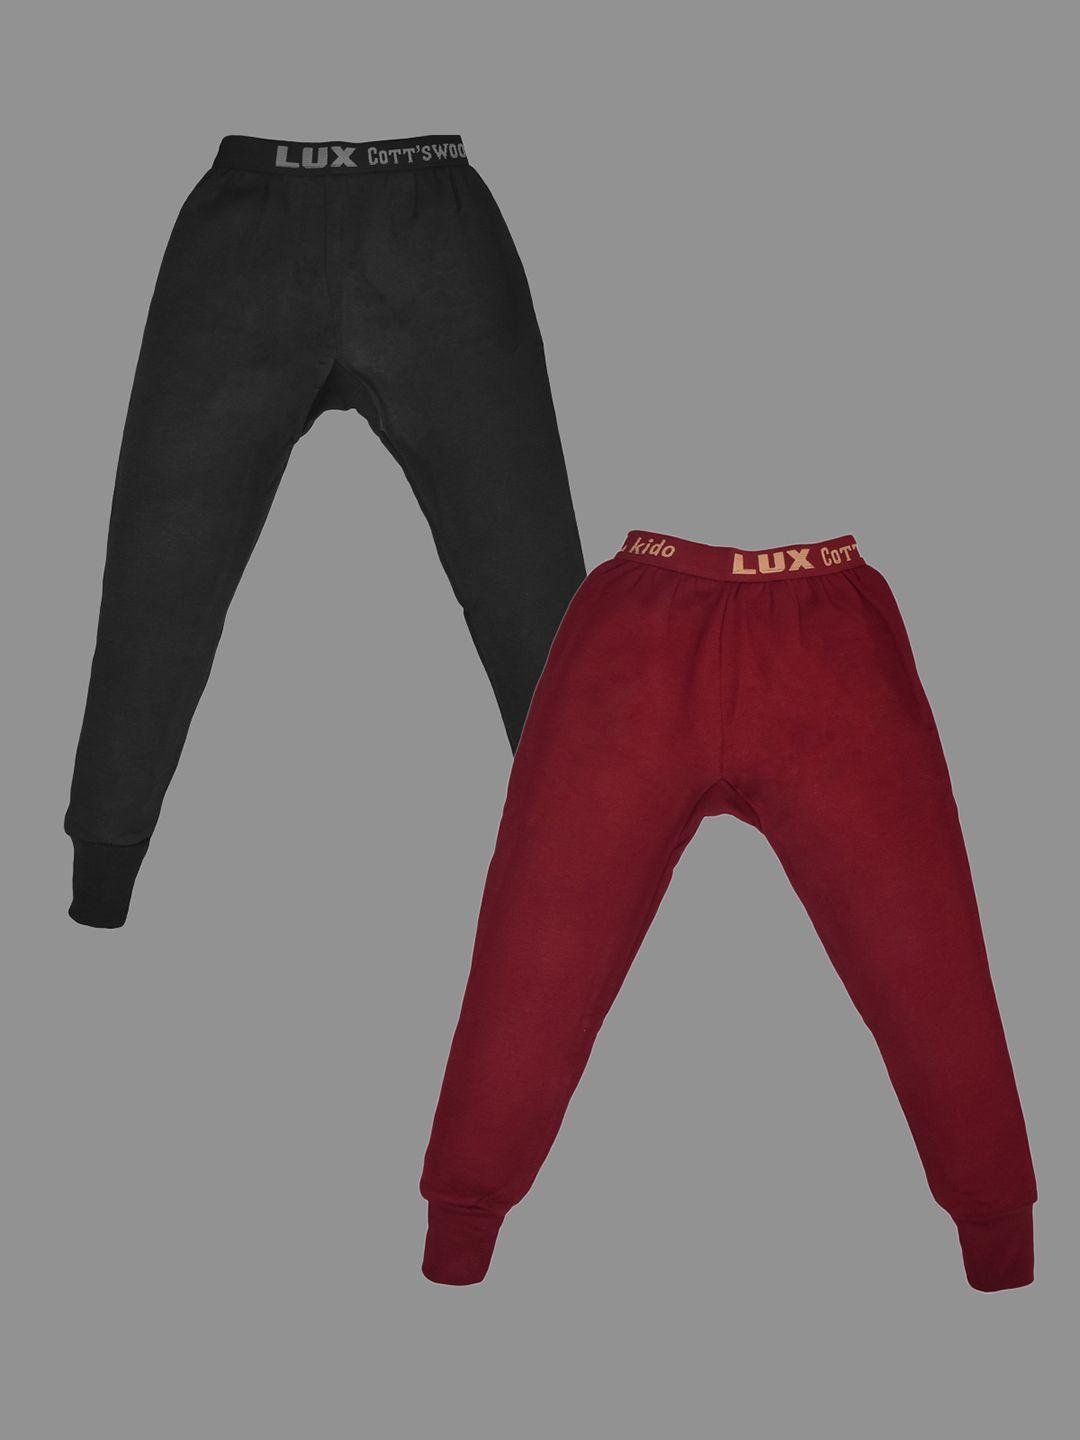 lux cottswool boys pack of 2 maroon & black solid thermal bottoms